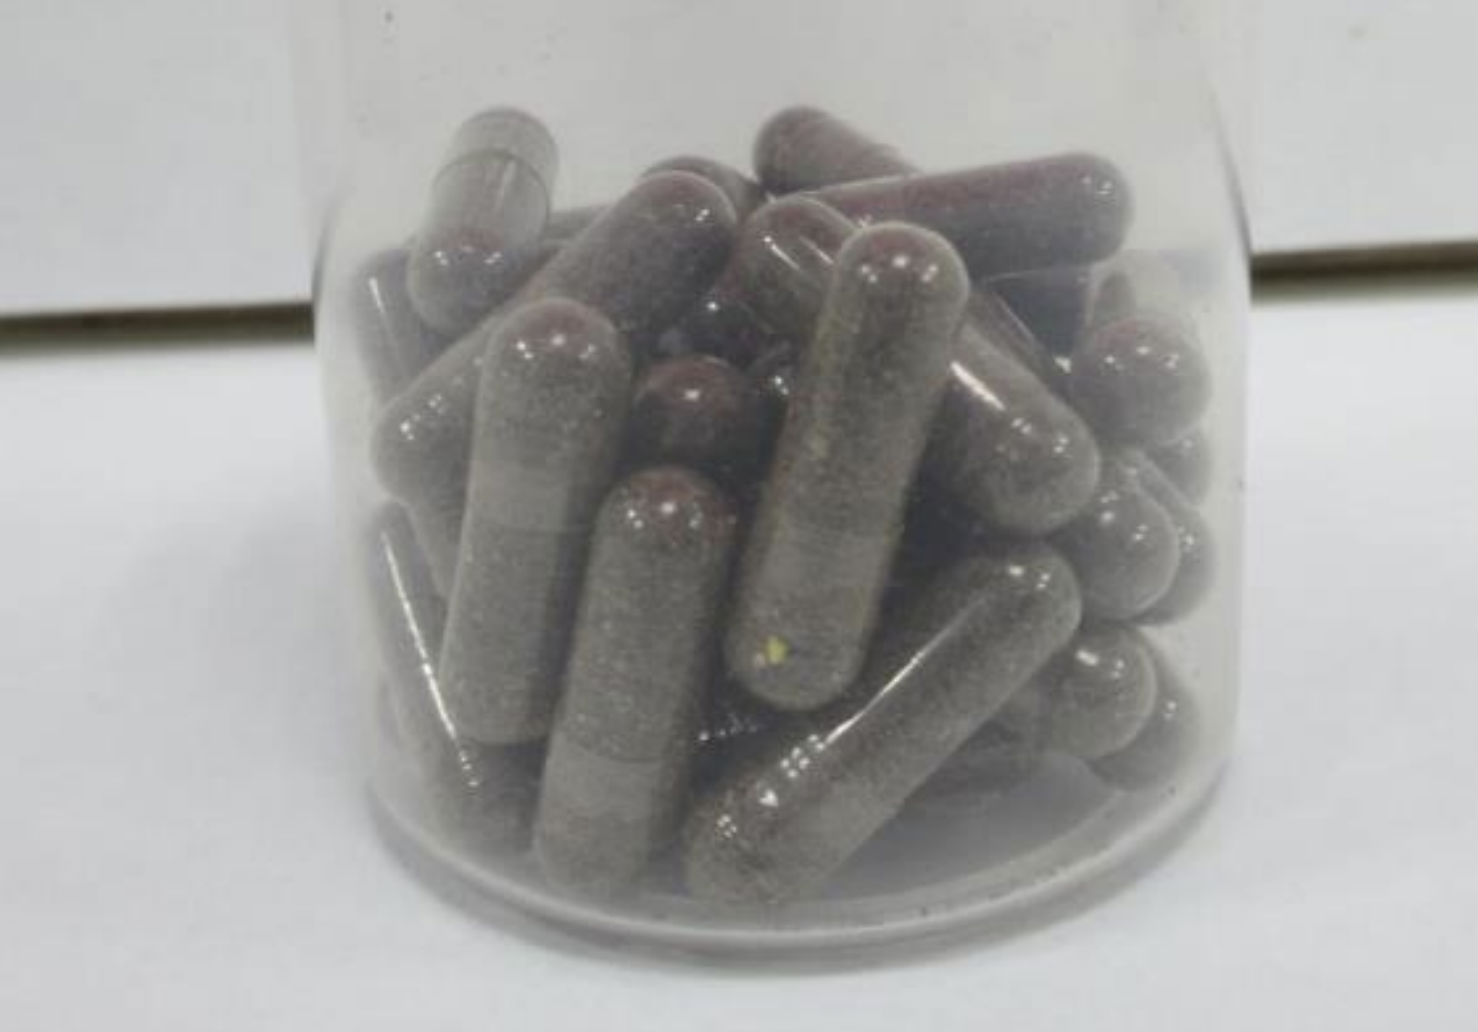 Unlabelled capsules containing brown powder tested positive for steroids. (Photo: HSA)